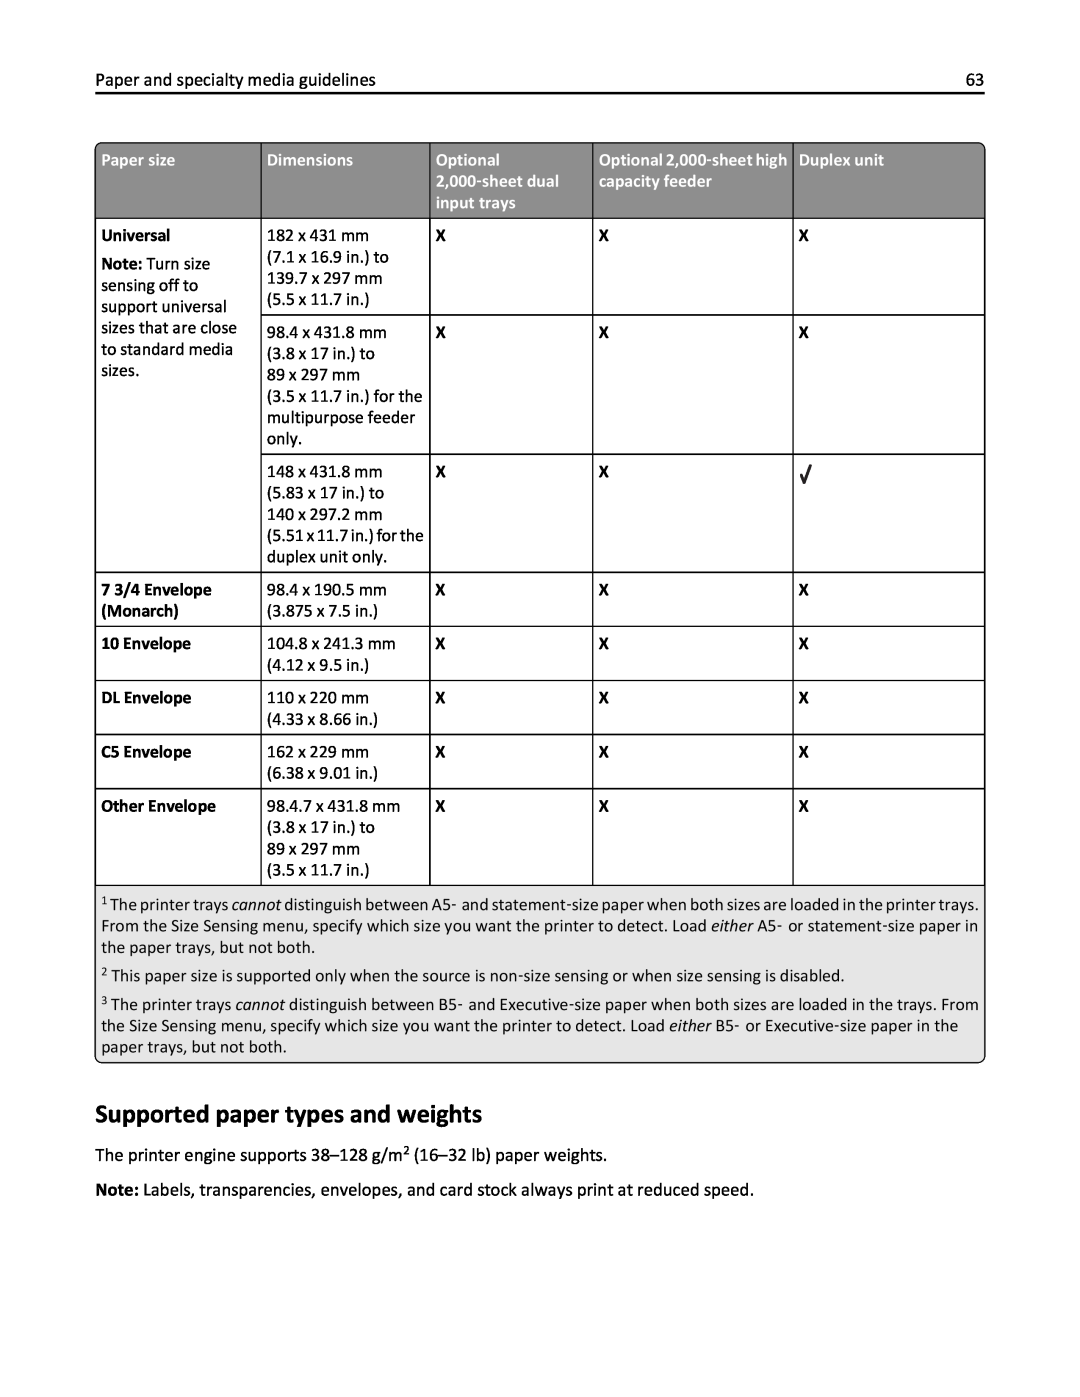 Lexmark 110 Supported paper types and weights, Paper and specialty media guidelines, Paper size, Dimensions, Optional 